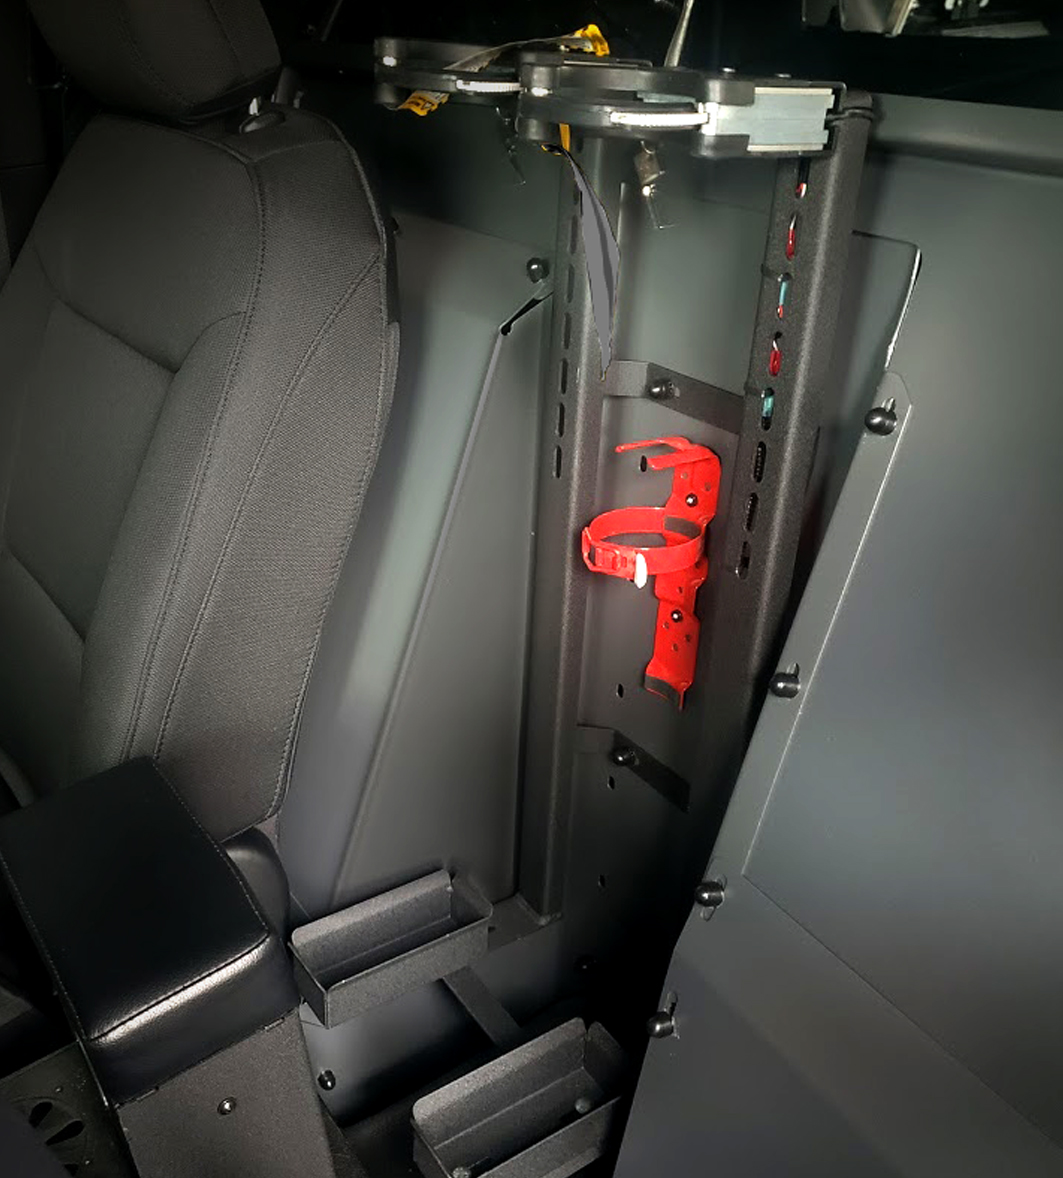 weapons rack product category page image example in vehicle. Innovative Emergency Equipment